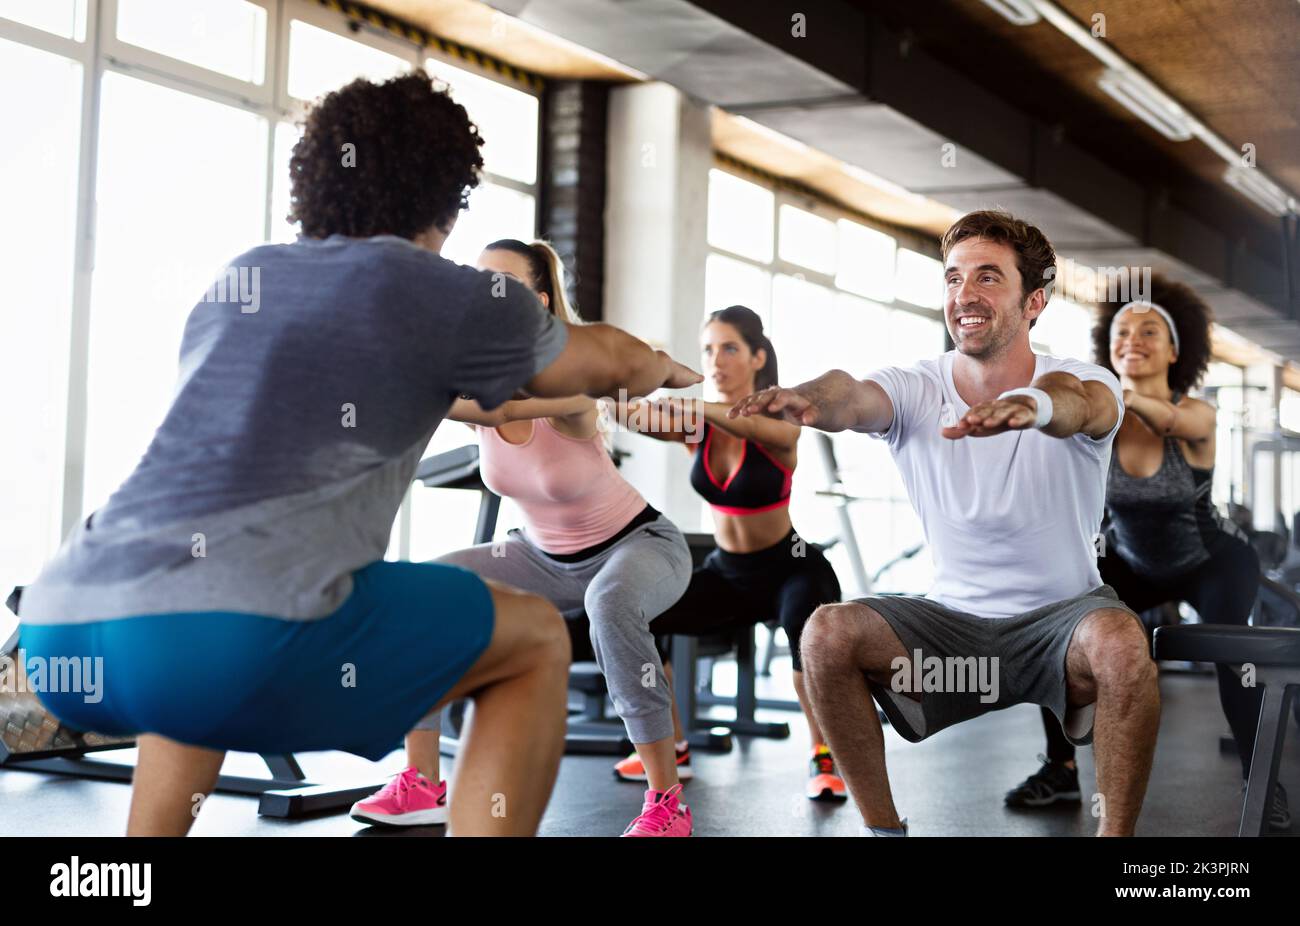 Group of young people, friends smiling and enjoy sport in gym. People exercise, work out concept. Stock Photo